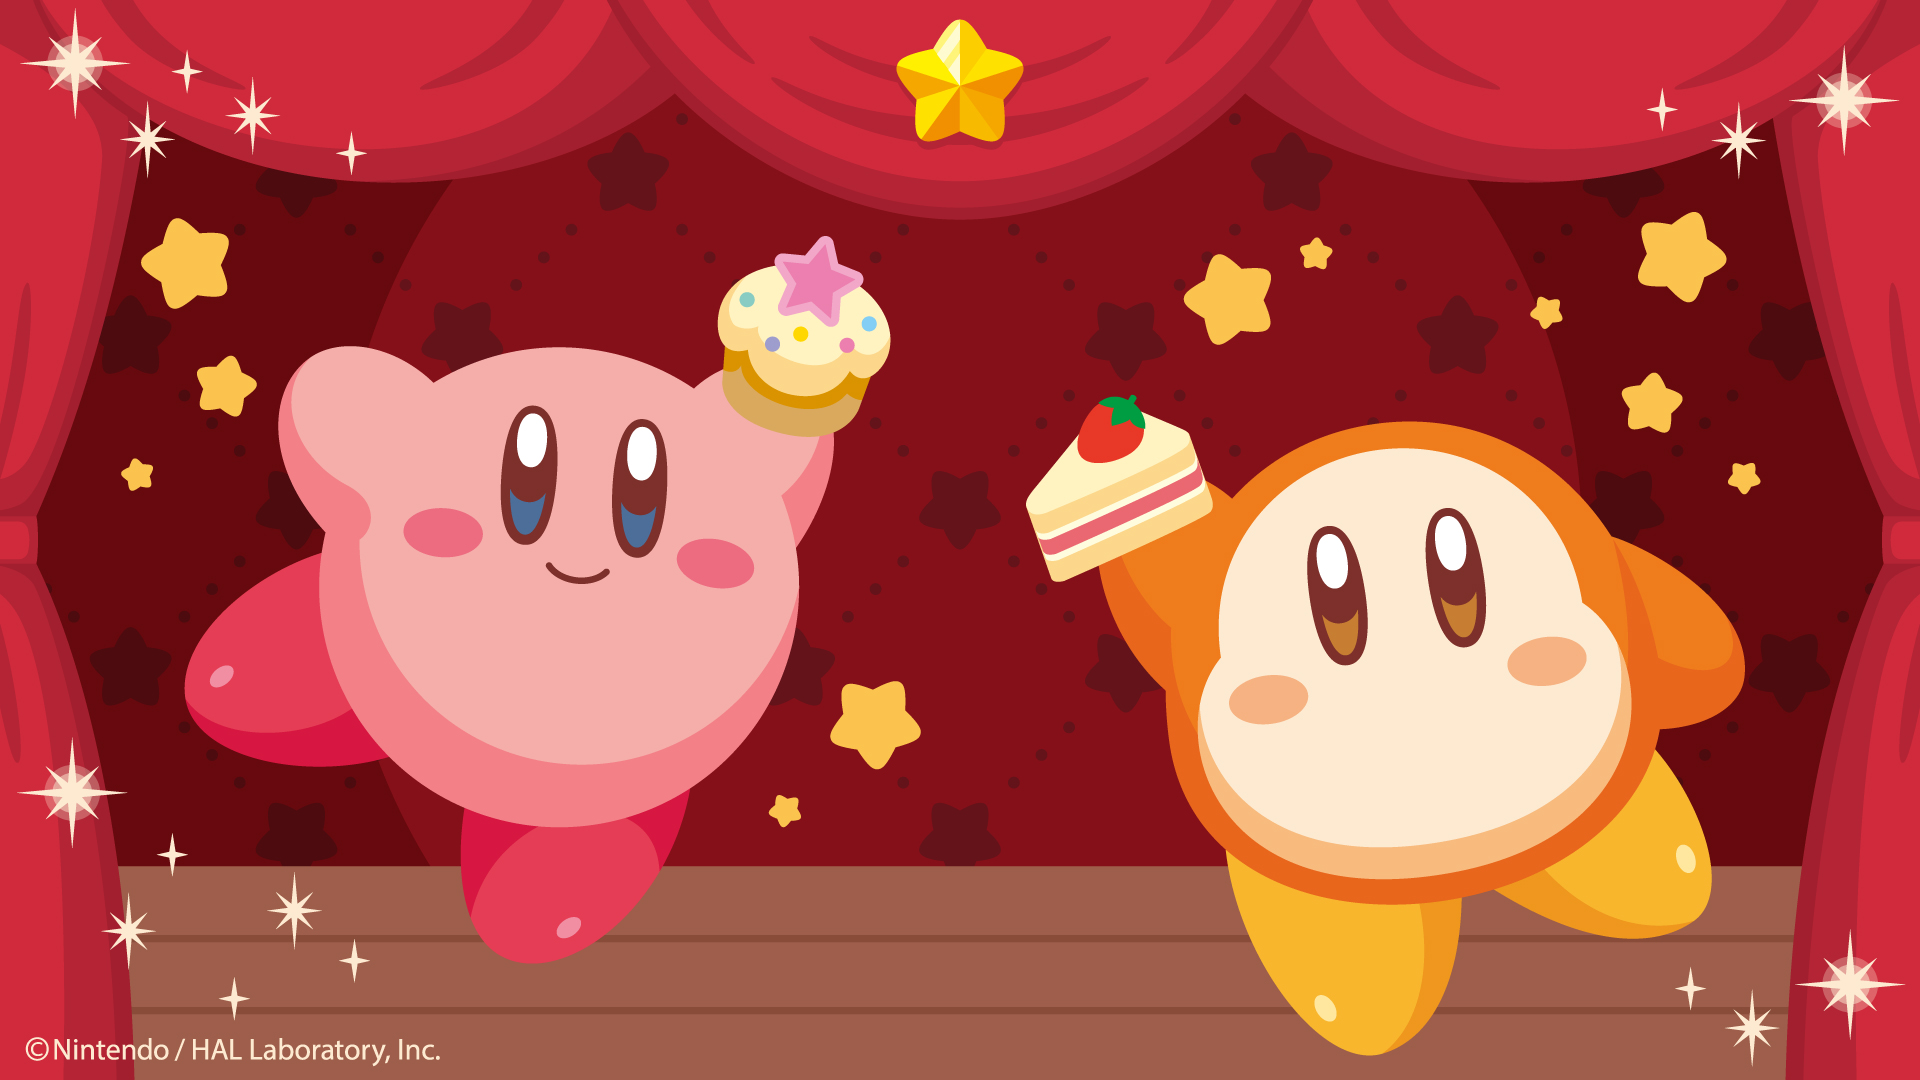 General 1920x1080 Kirby cupcakes cake sweets video game characters